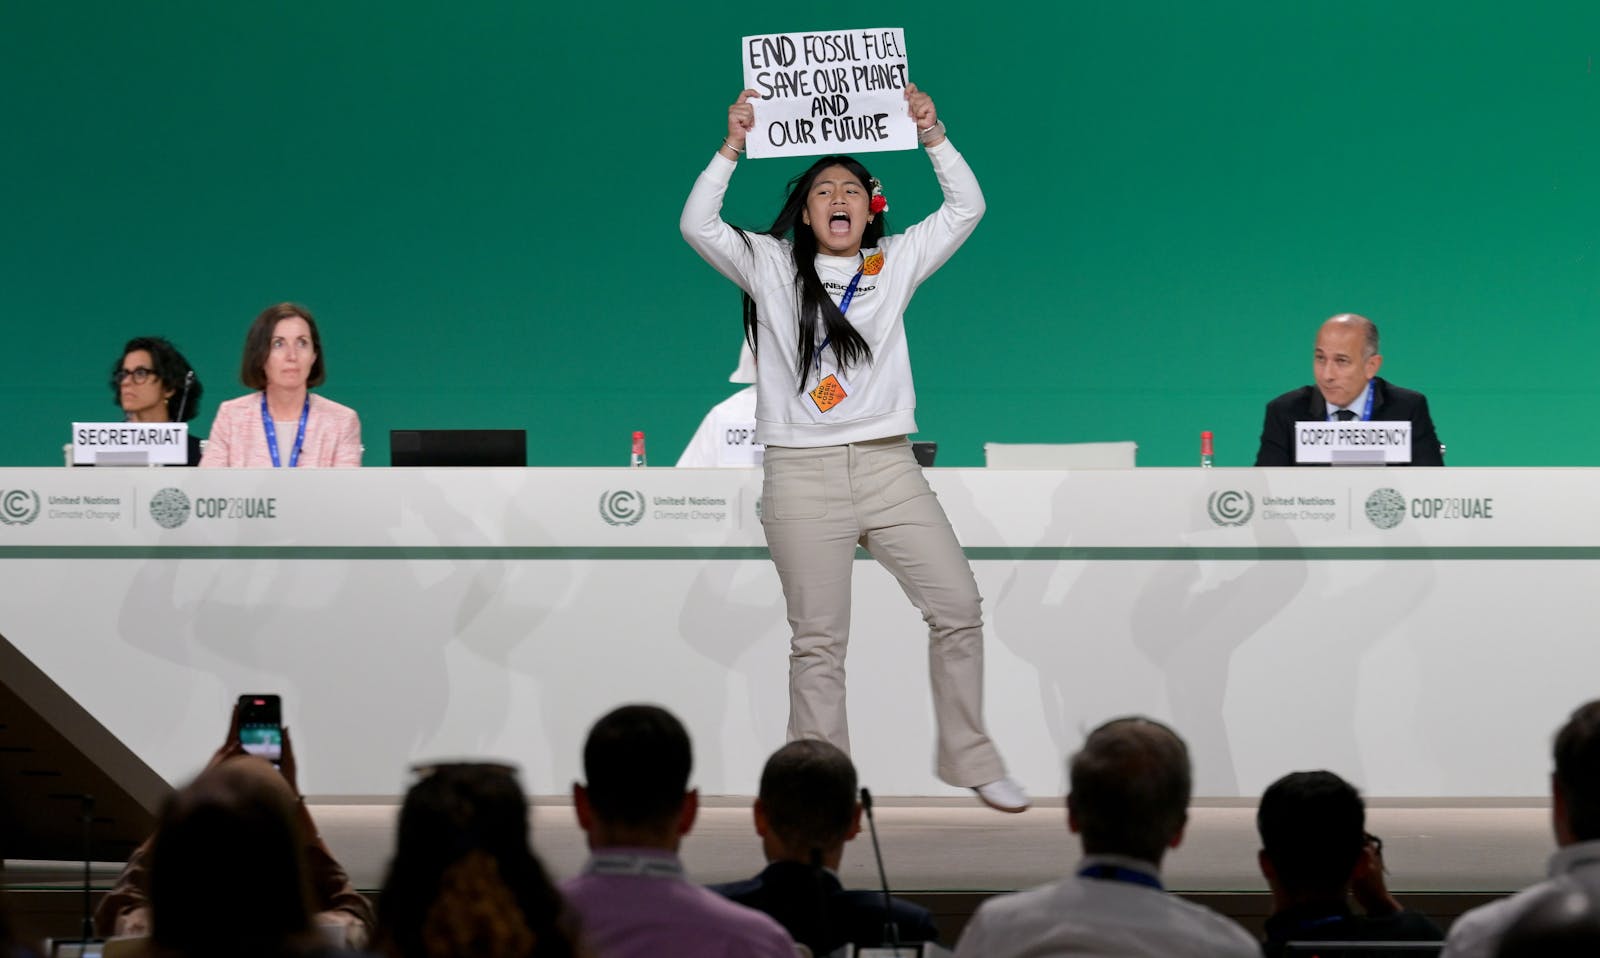 At COP 28, global consensus on how climate change affects health